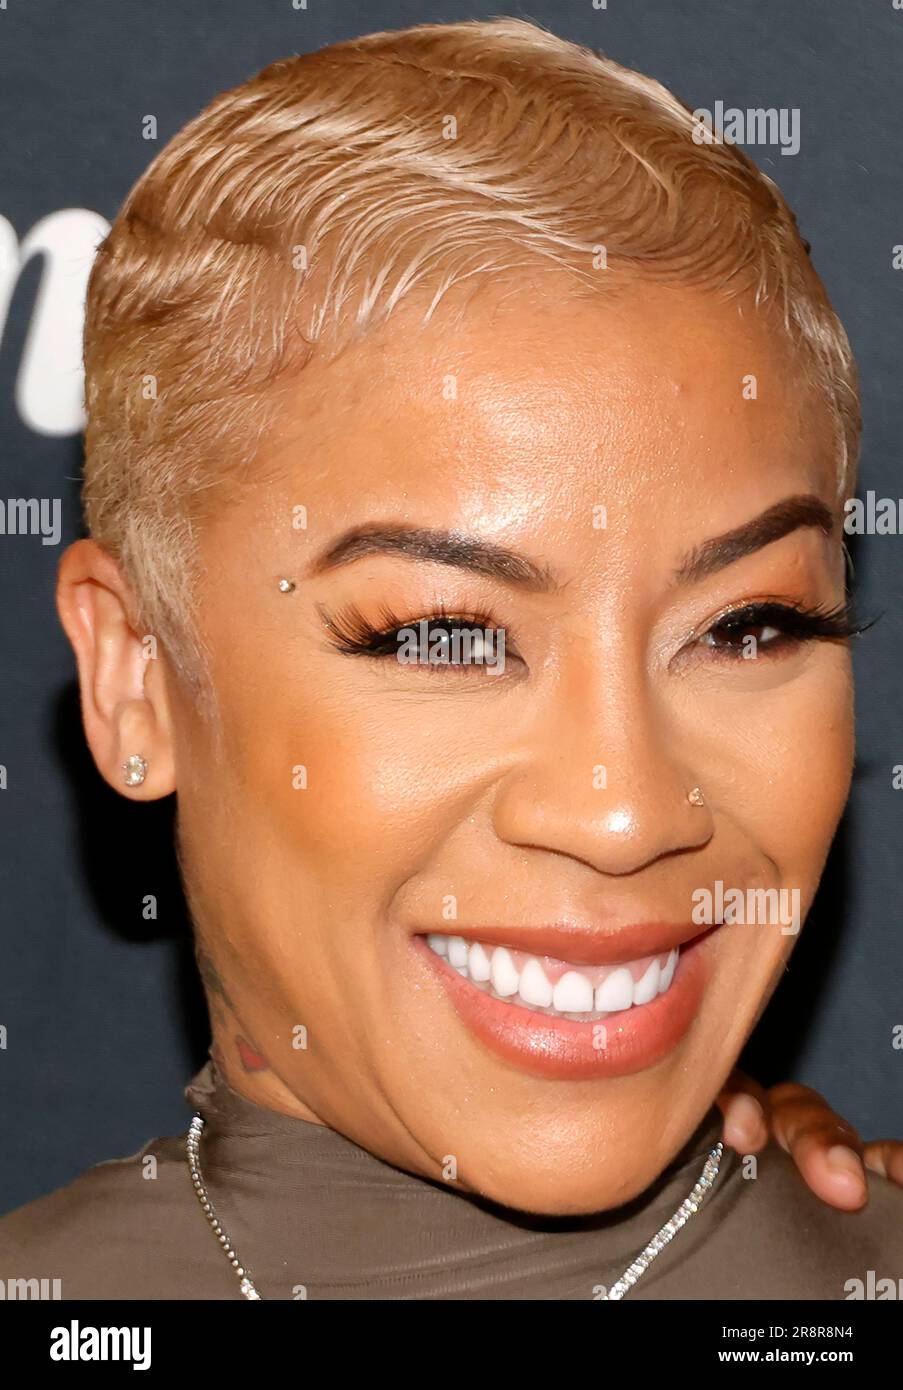 Keyshia Cole Makes her Acting Debut in Keyshia Cole: This is My Story in  2023